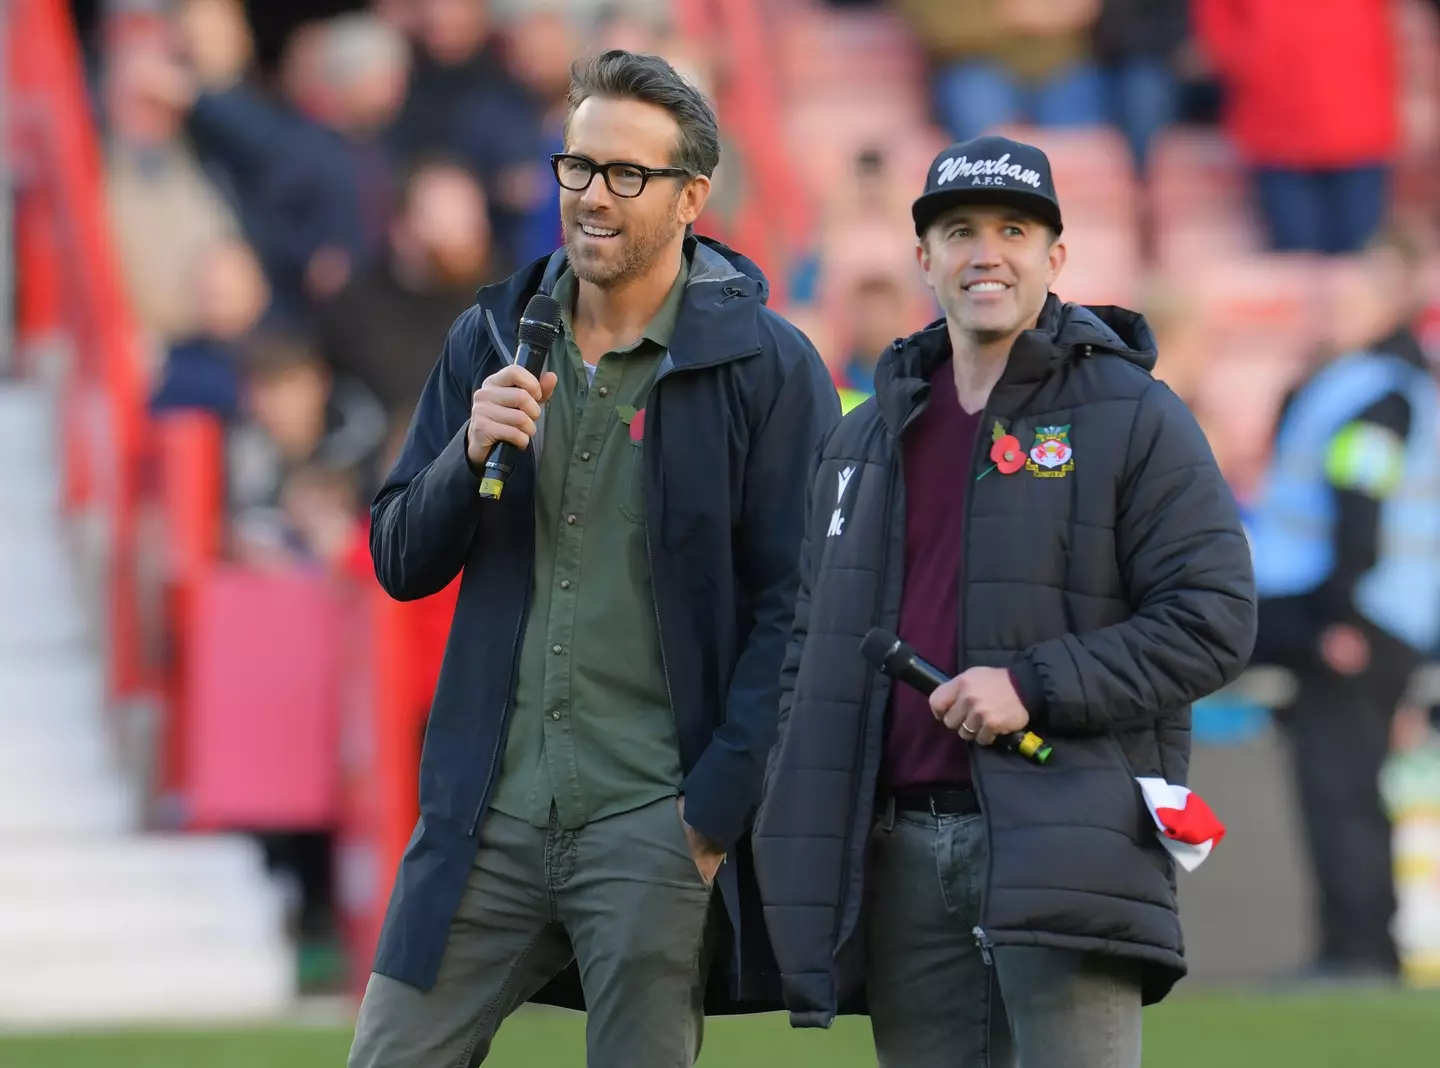 Reynolds and McElhenney at a Wrexham game. (Image